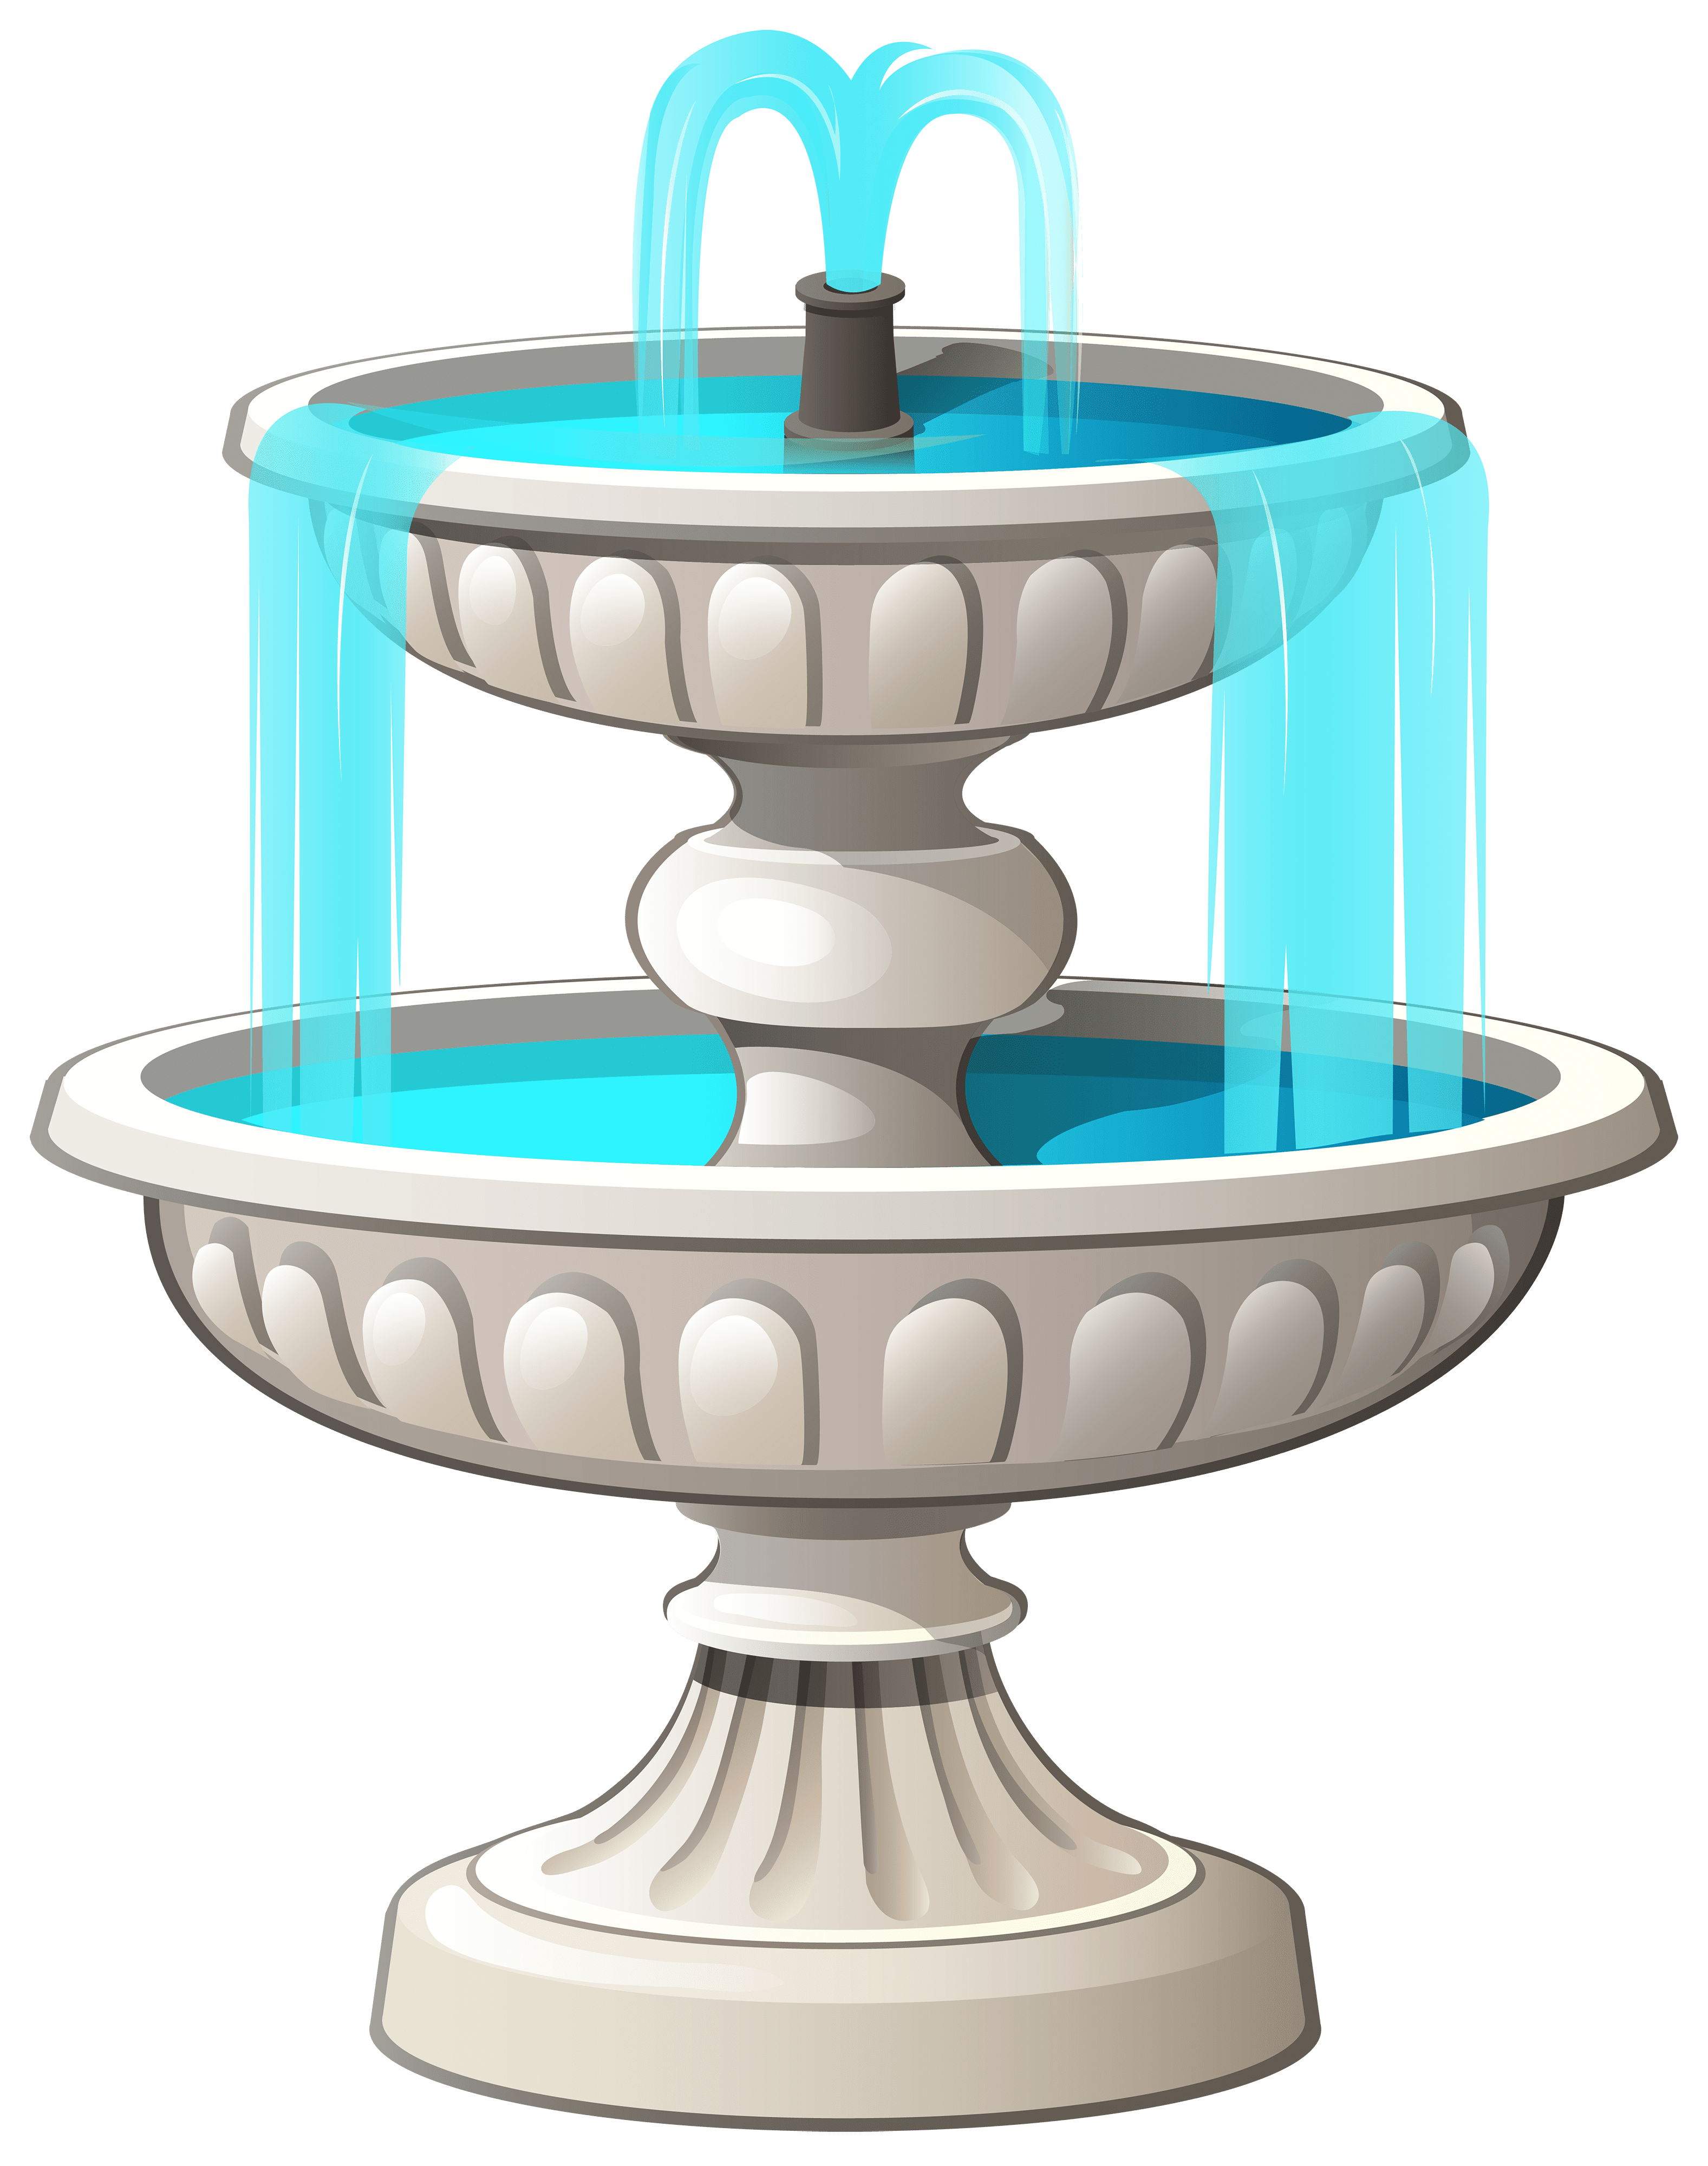 fountain clipart round water